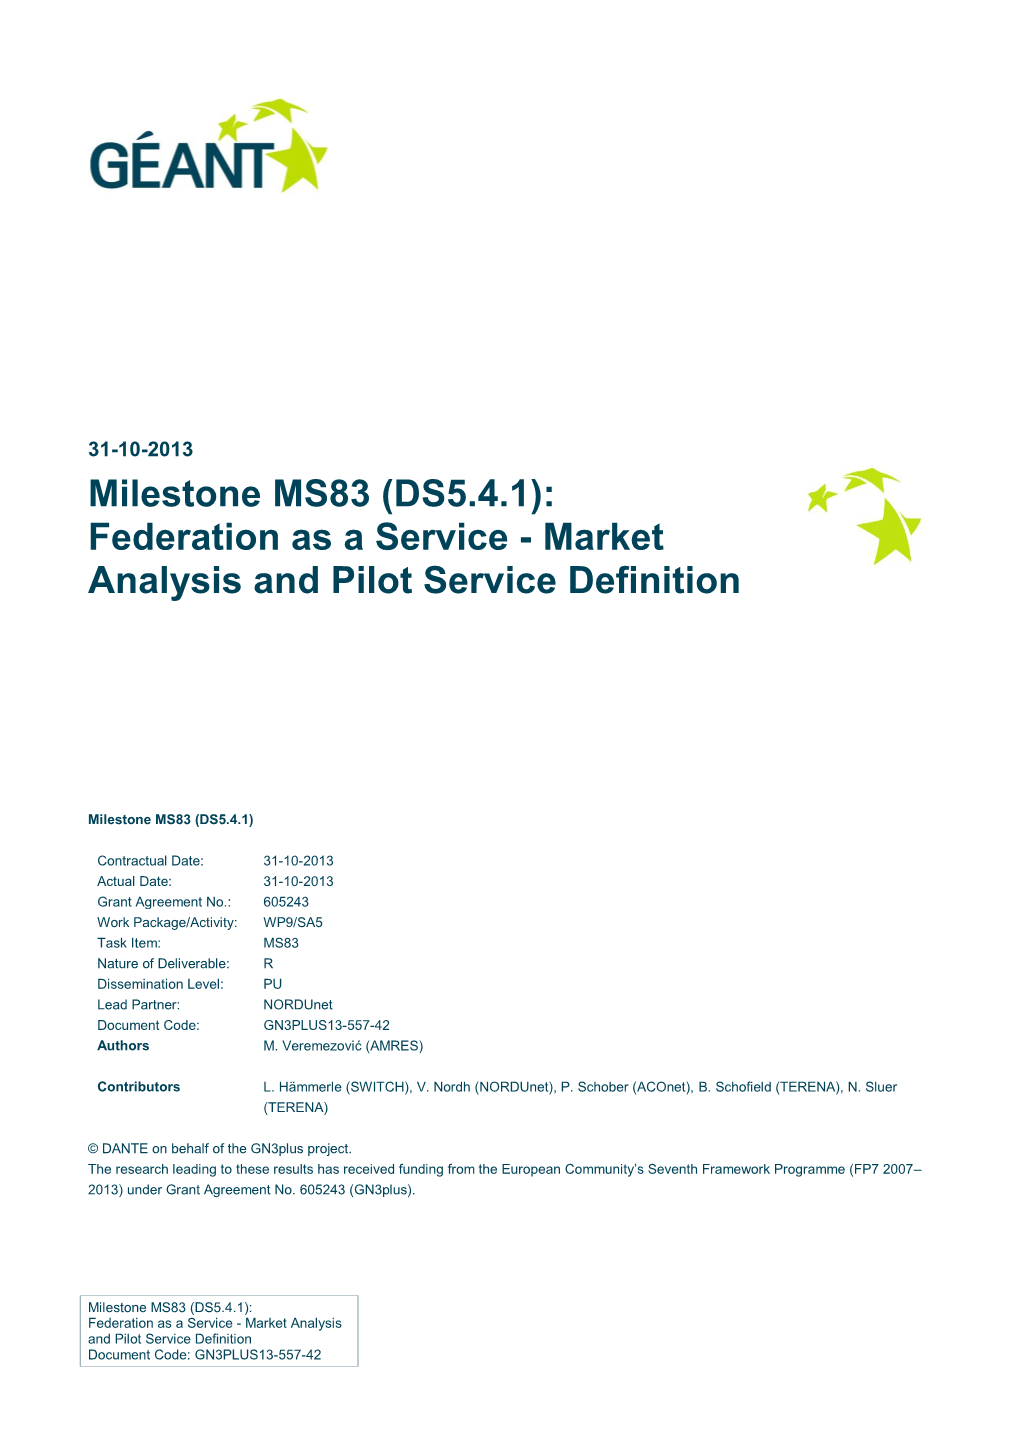 Federation As a Service - Market Analysis and Pilot Service Definition